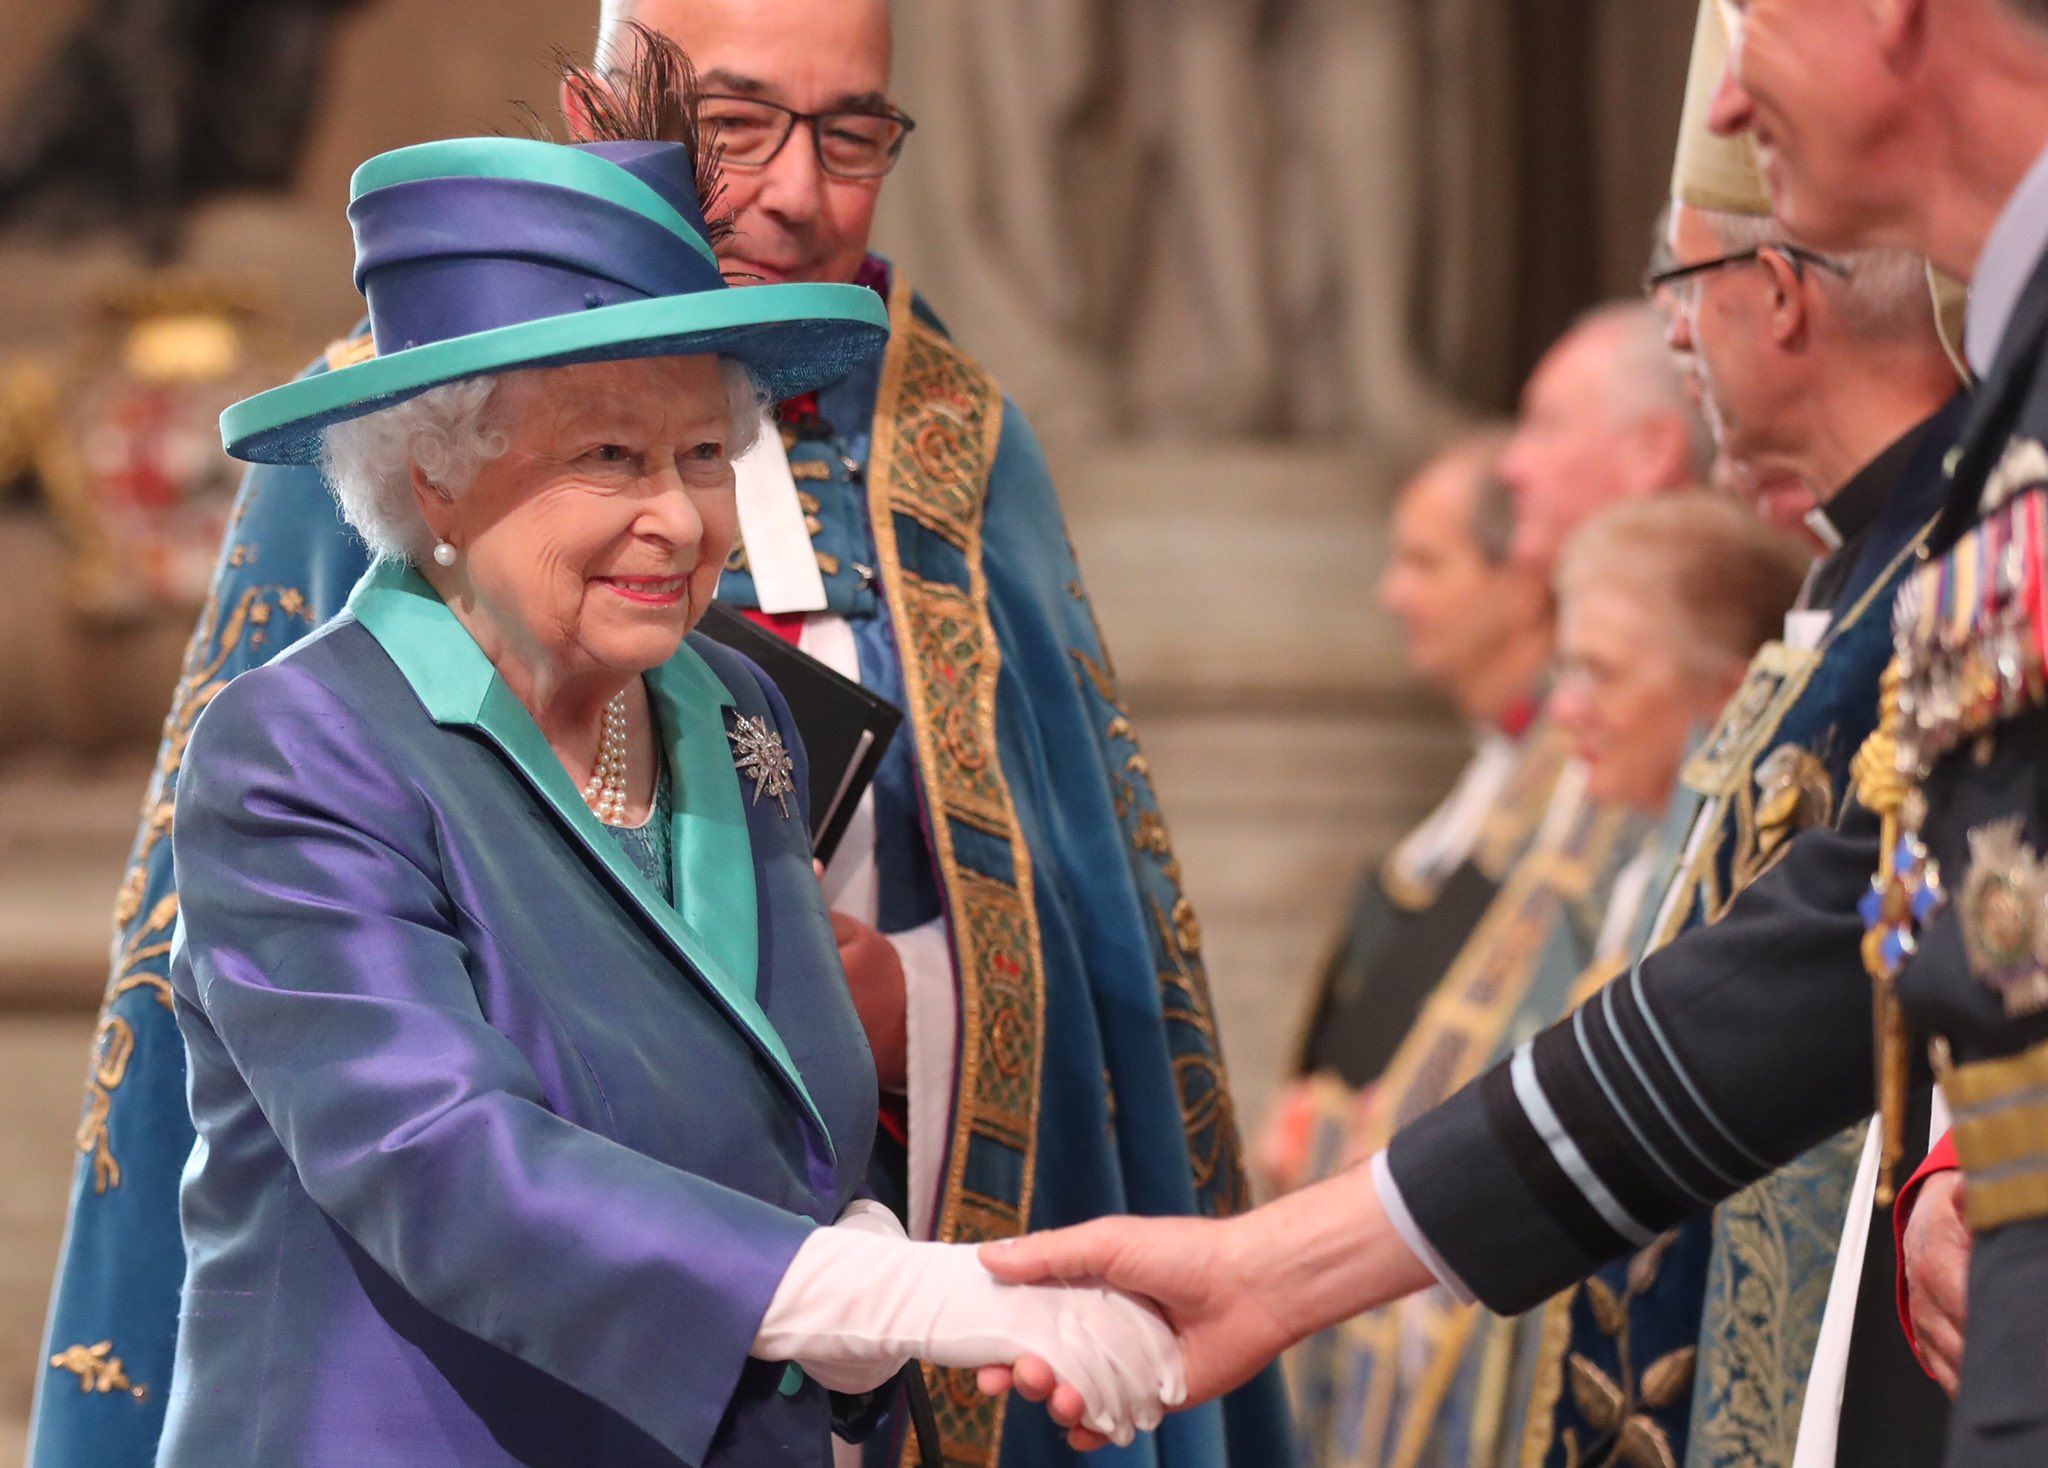 Leaving colonial past behind: Barbados to remove Queen Elizabeth as head of state